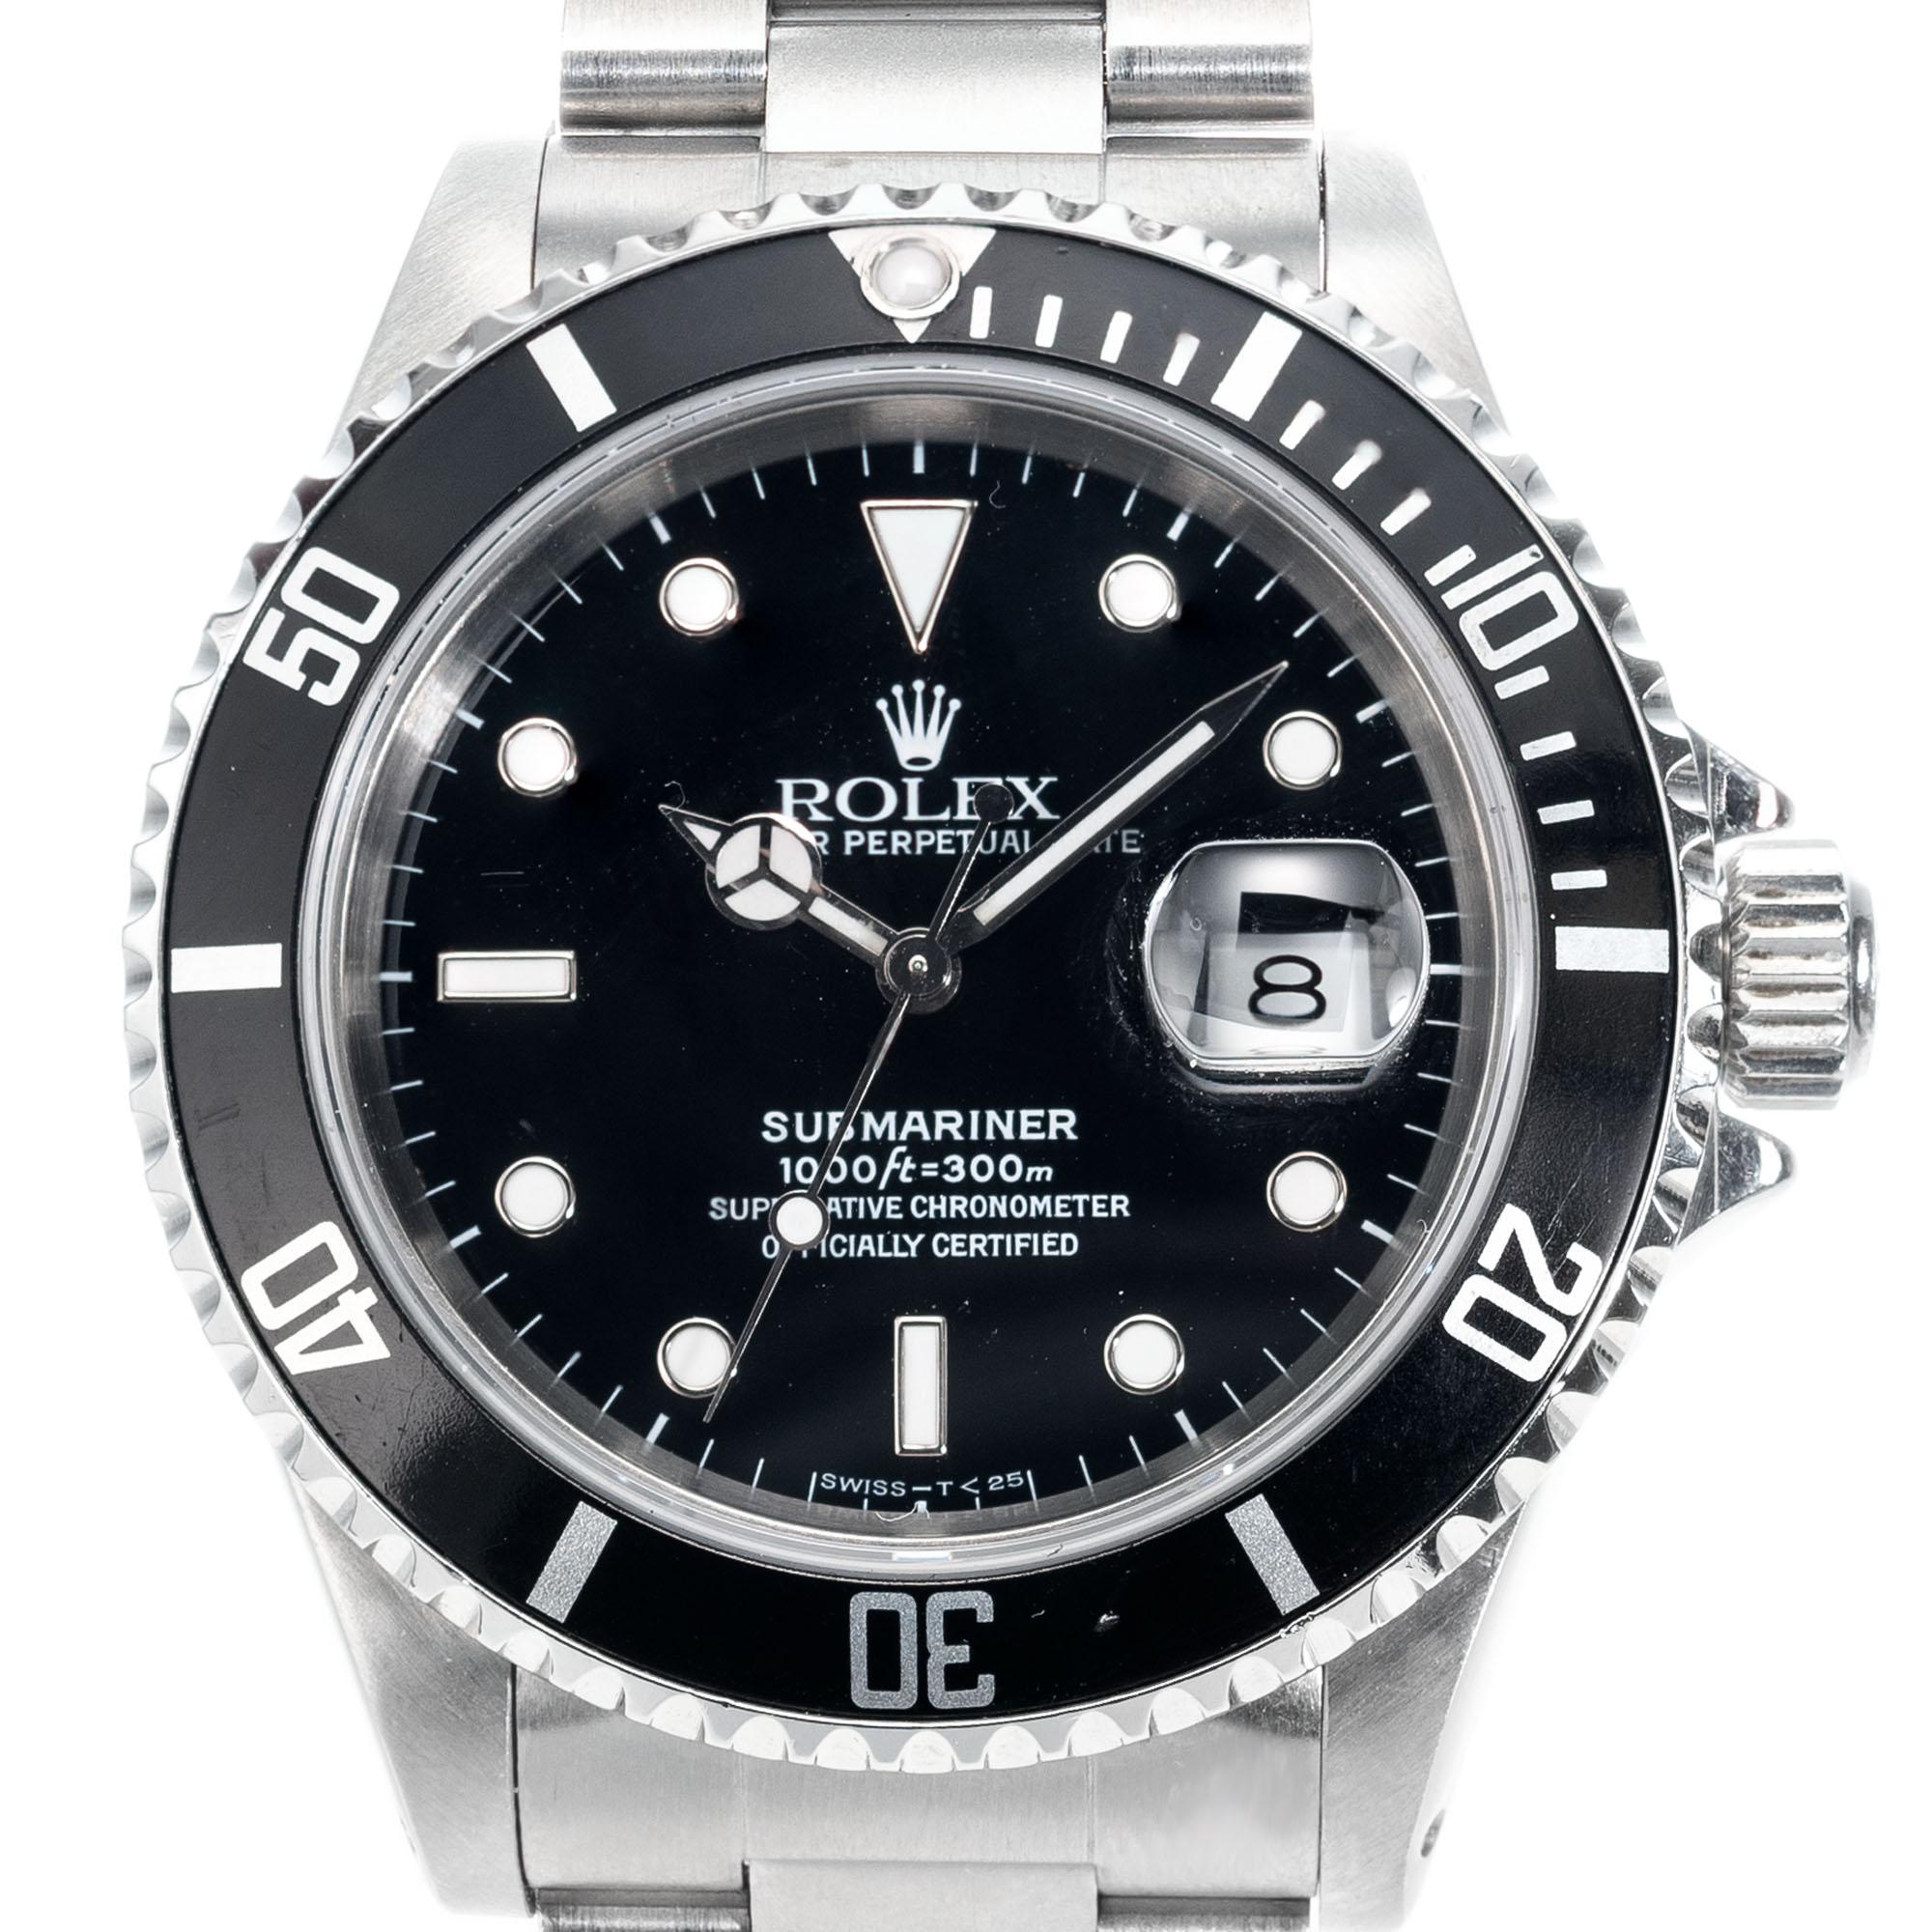 Rolex Stainless Steel Submariner Men's Wristwatch In Excellent Condition For Sale In Stamford, CT